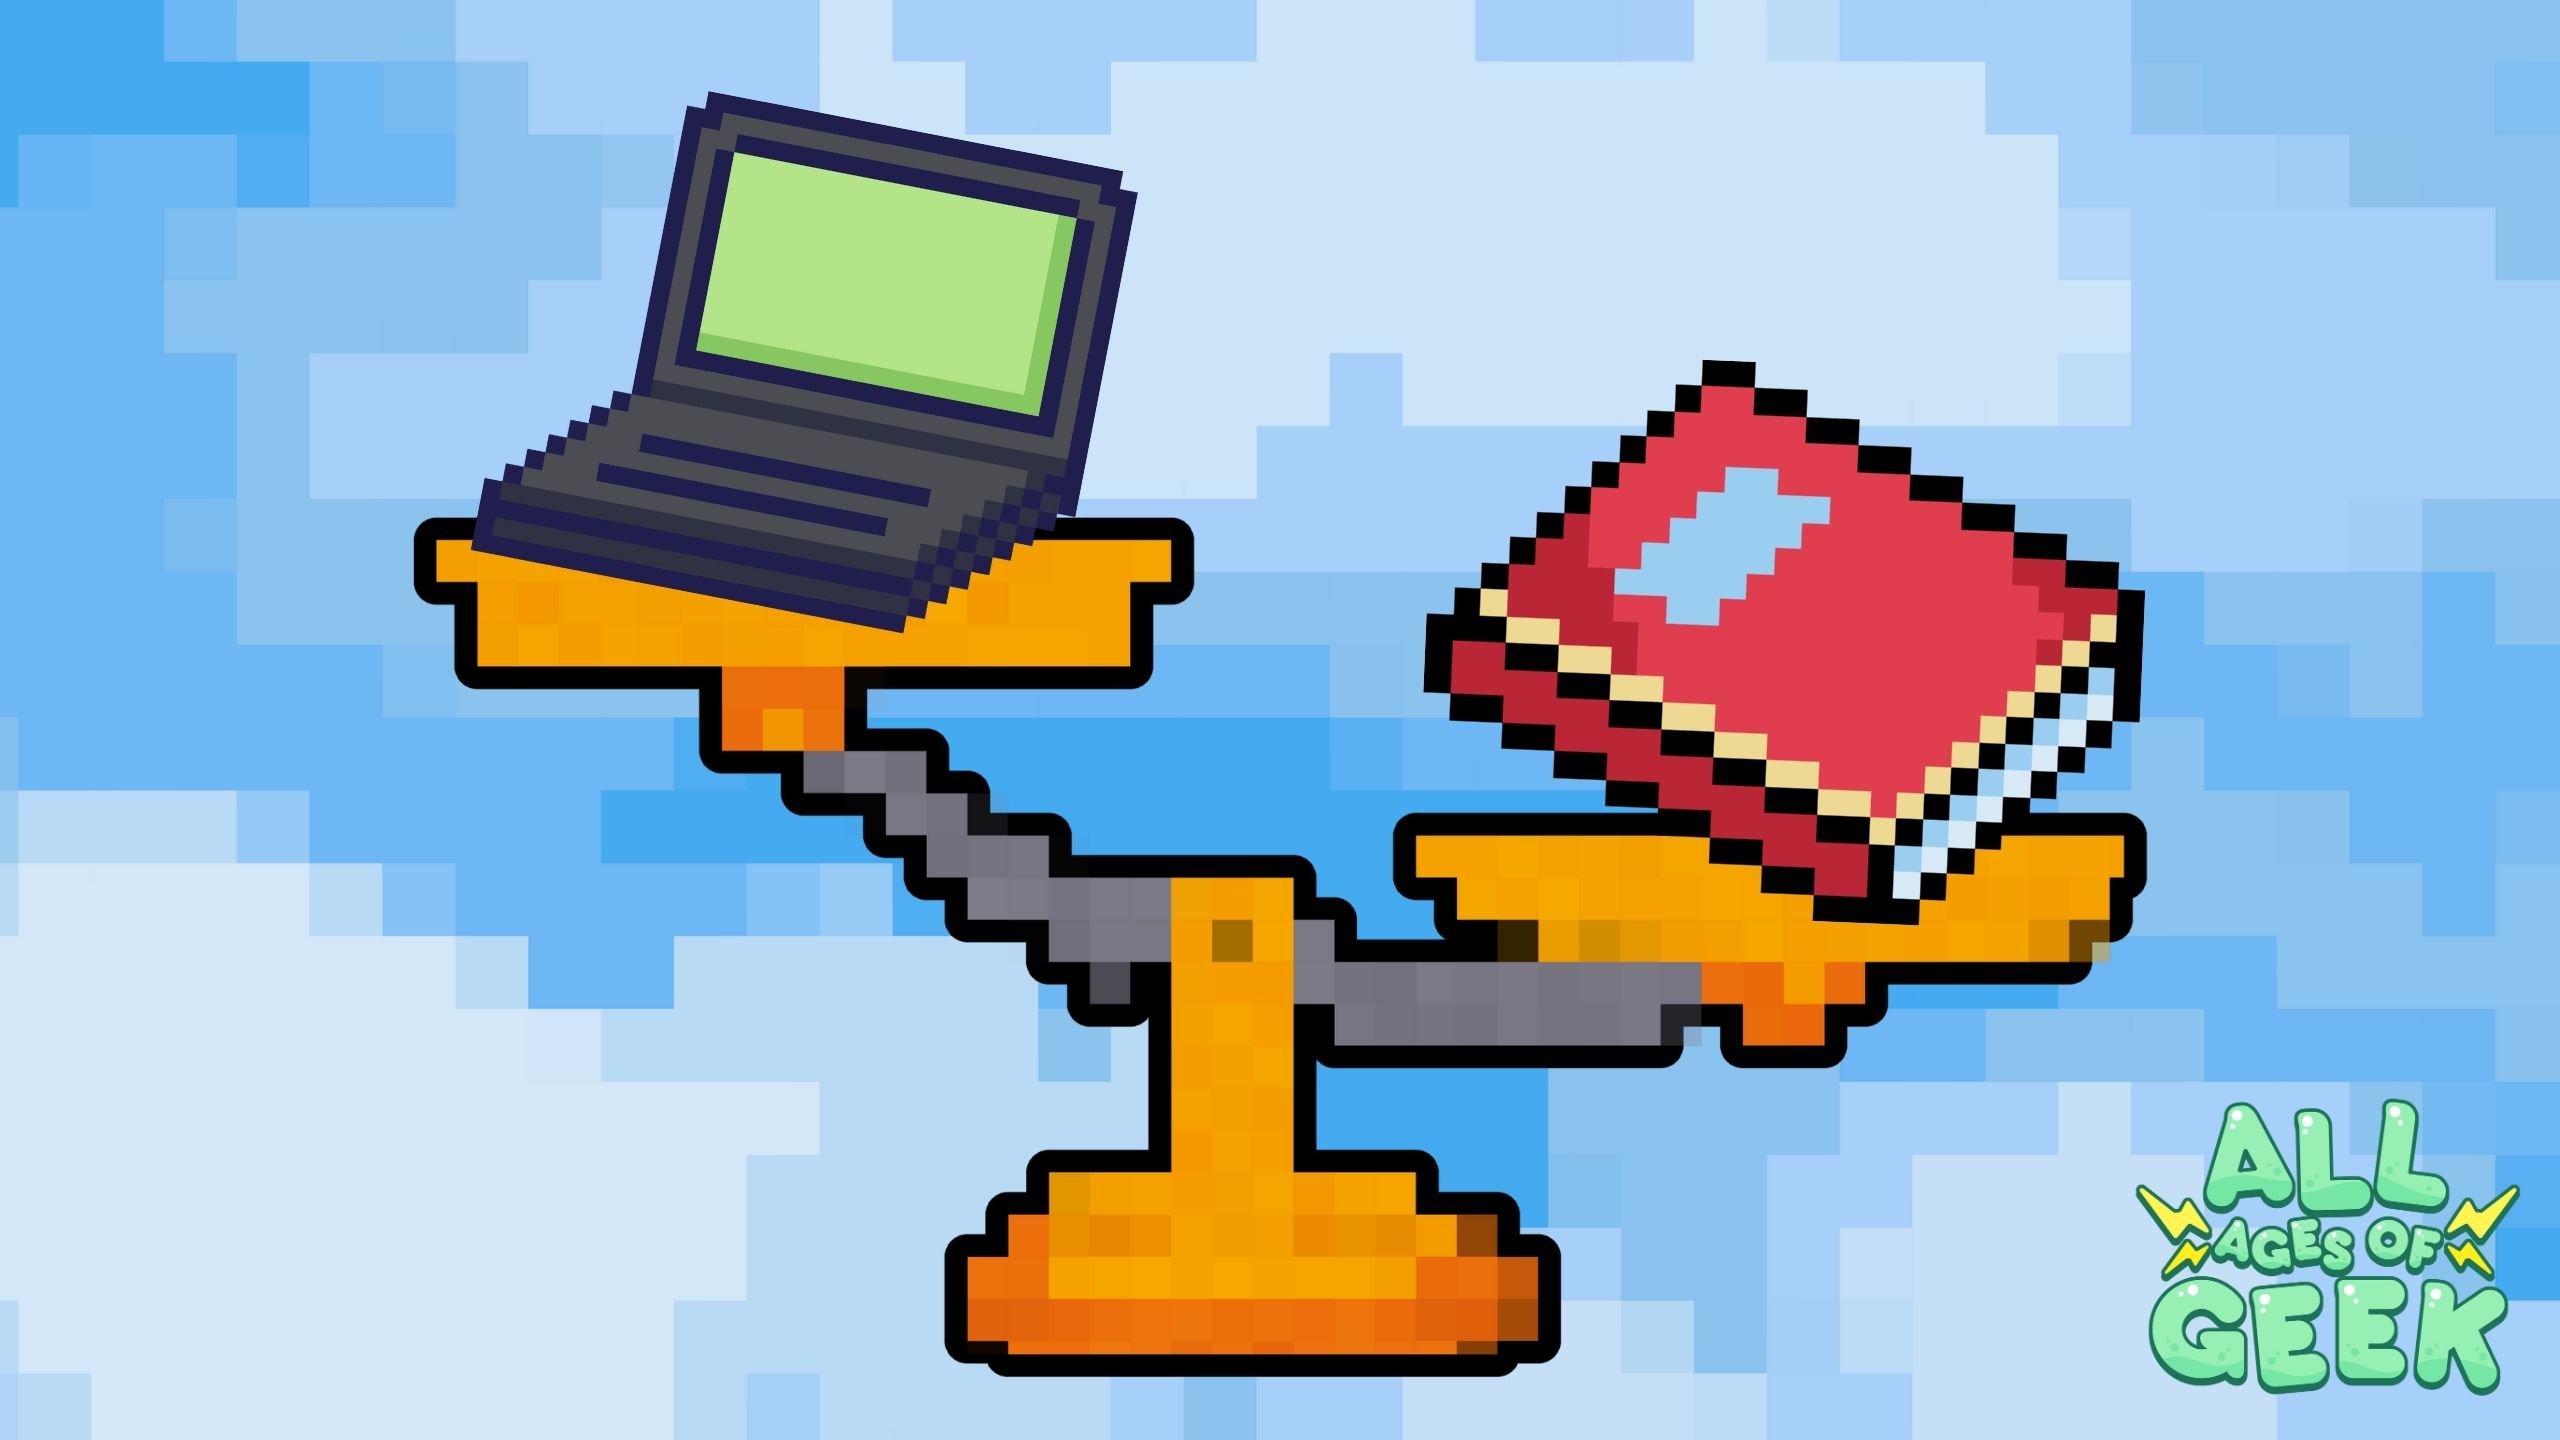 Pixel art illustration of a seesaw balancing a laptop on one side and a book on the other, symbolizing the balance between screen time and offline activities. The background features a pixelated blue sky. The All Ages of Geek logo is displayed in the bottom right corner, emphasizing the connection to educational content and geek culture.